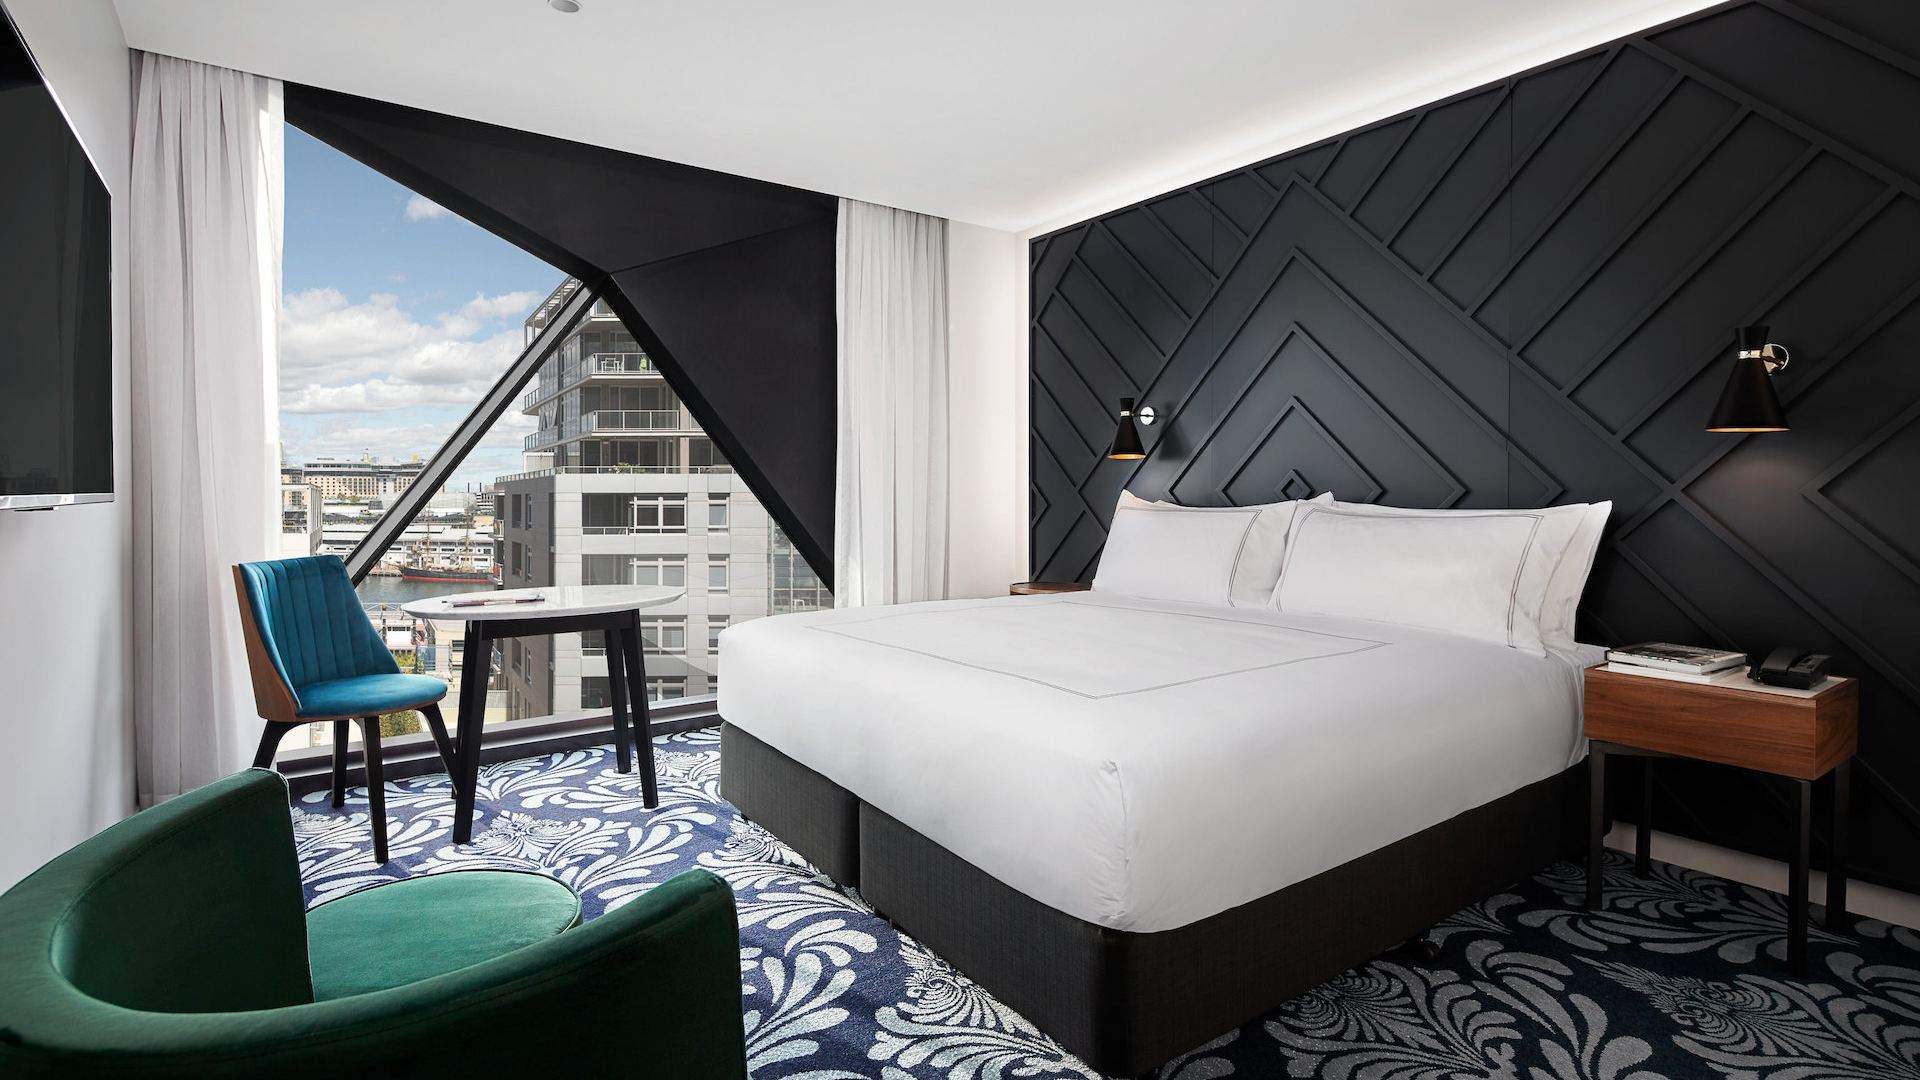 We're Giving Away a Luxe Staycation in the CBD